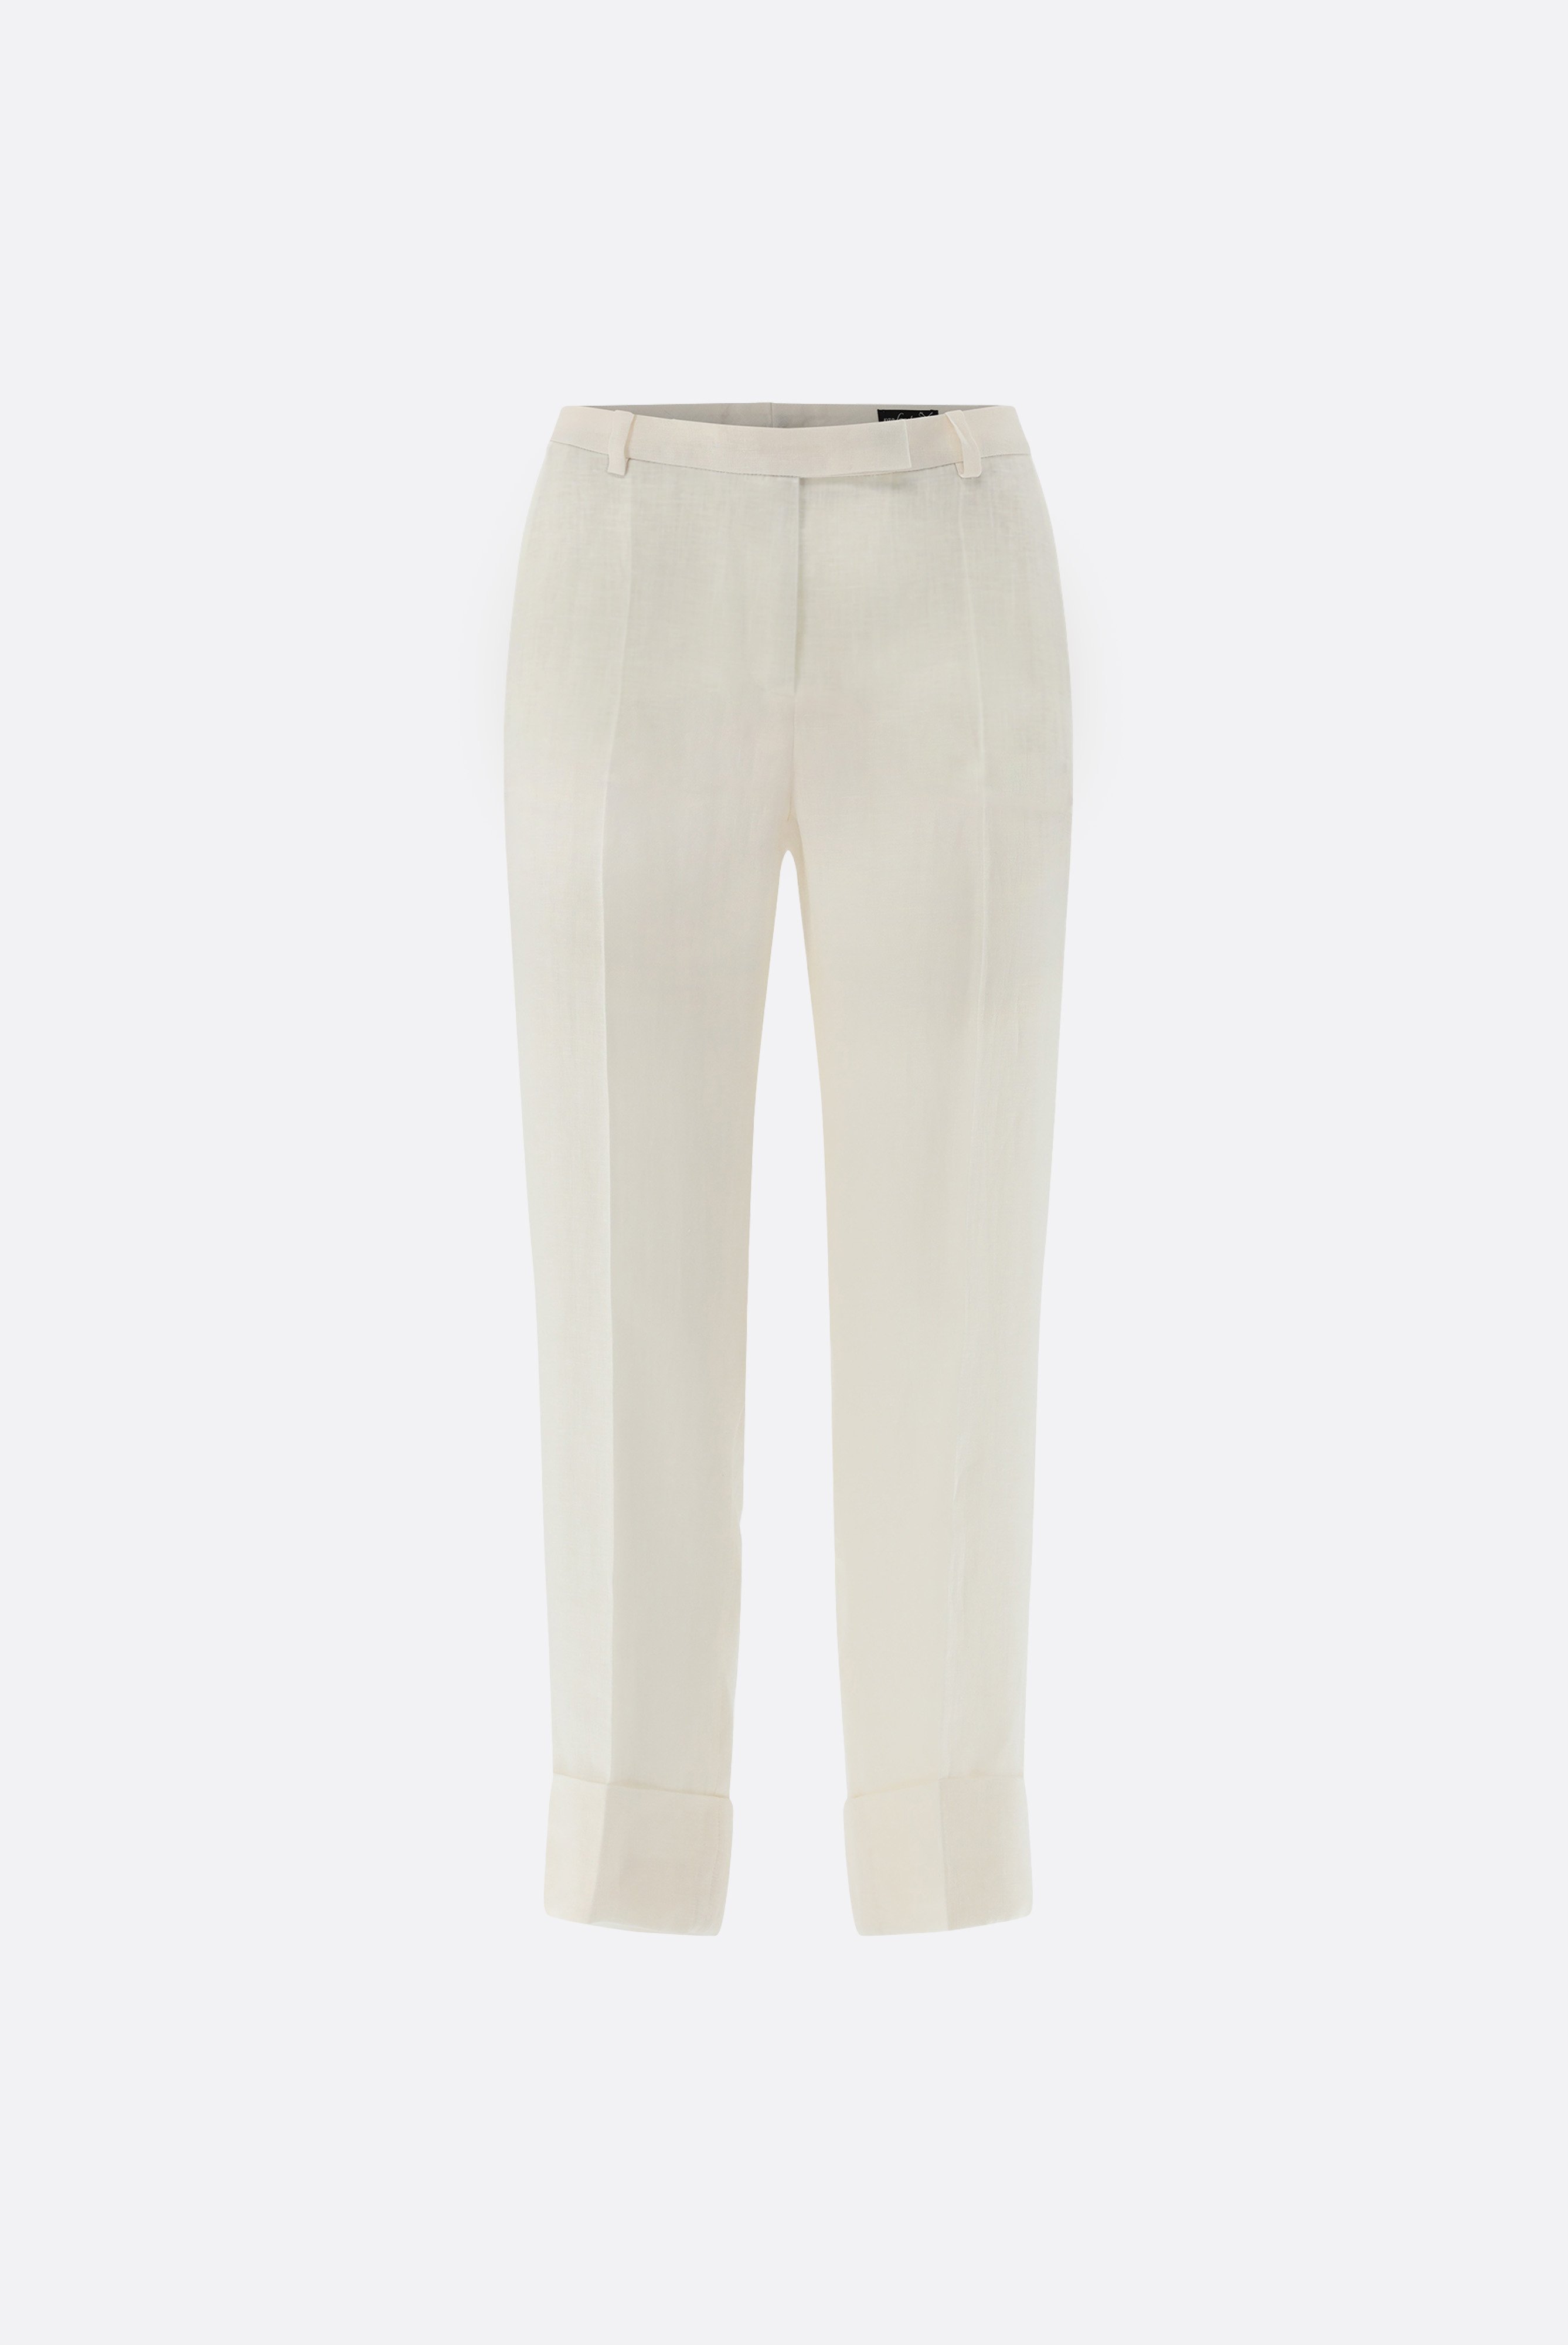 Jeans & Trousers+Linen Pants with Cuff+05.657V..H50555.110.34